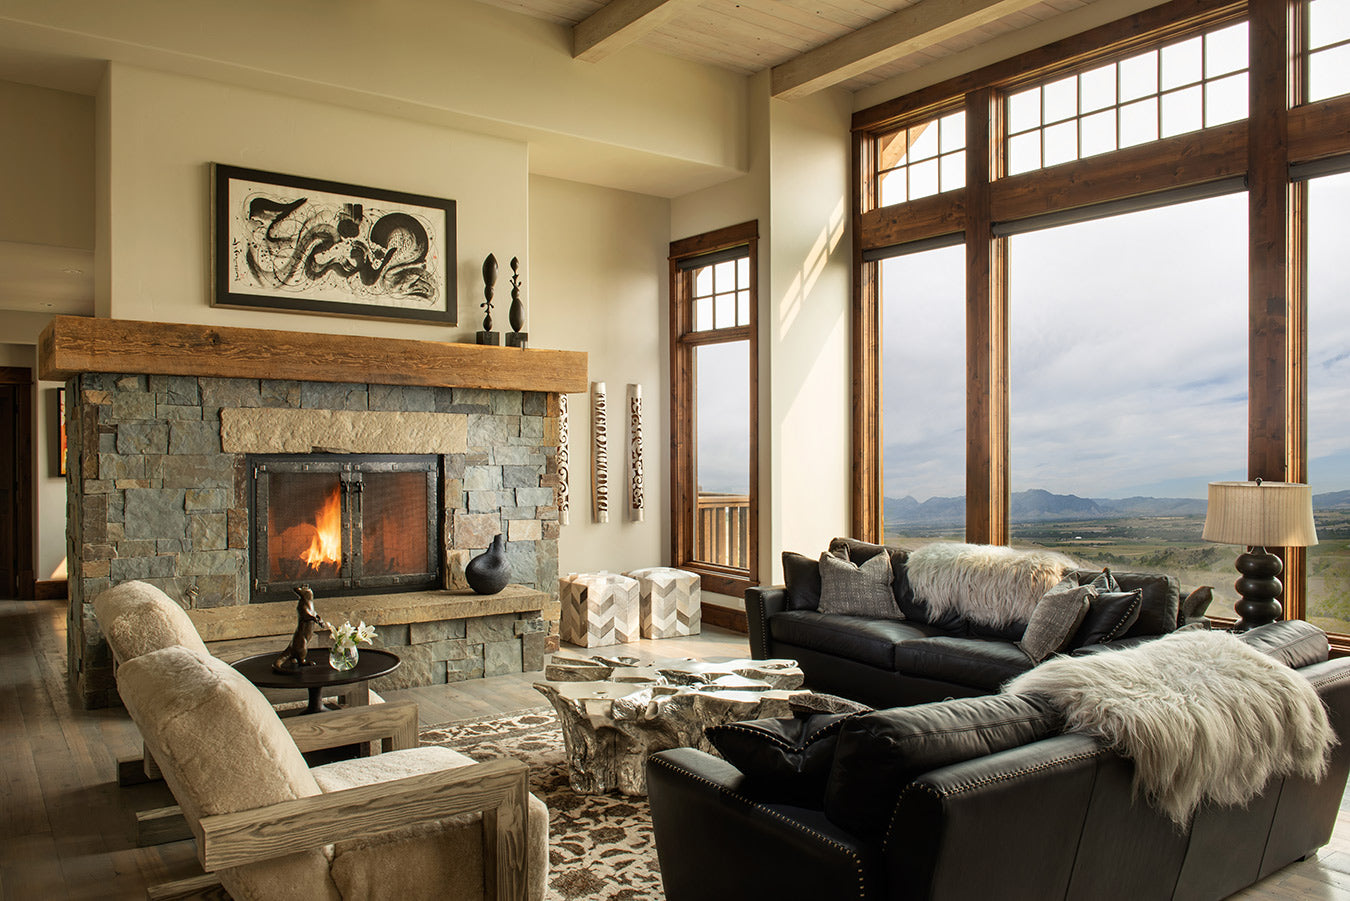 Cozy living room with stone fireplace and large window with incredible view